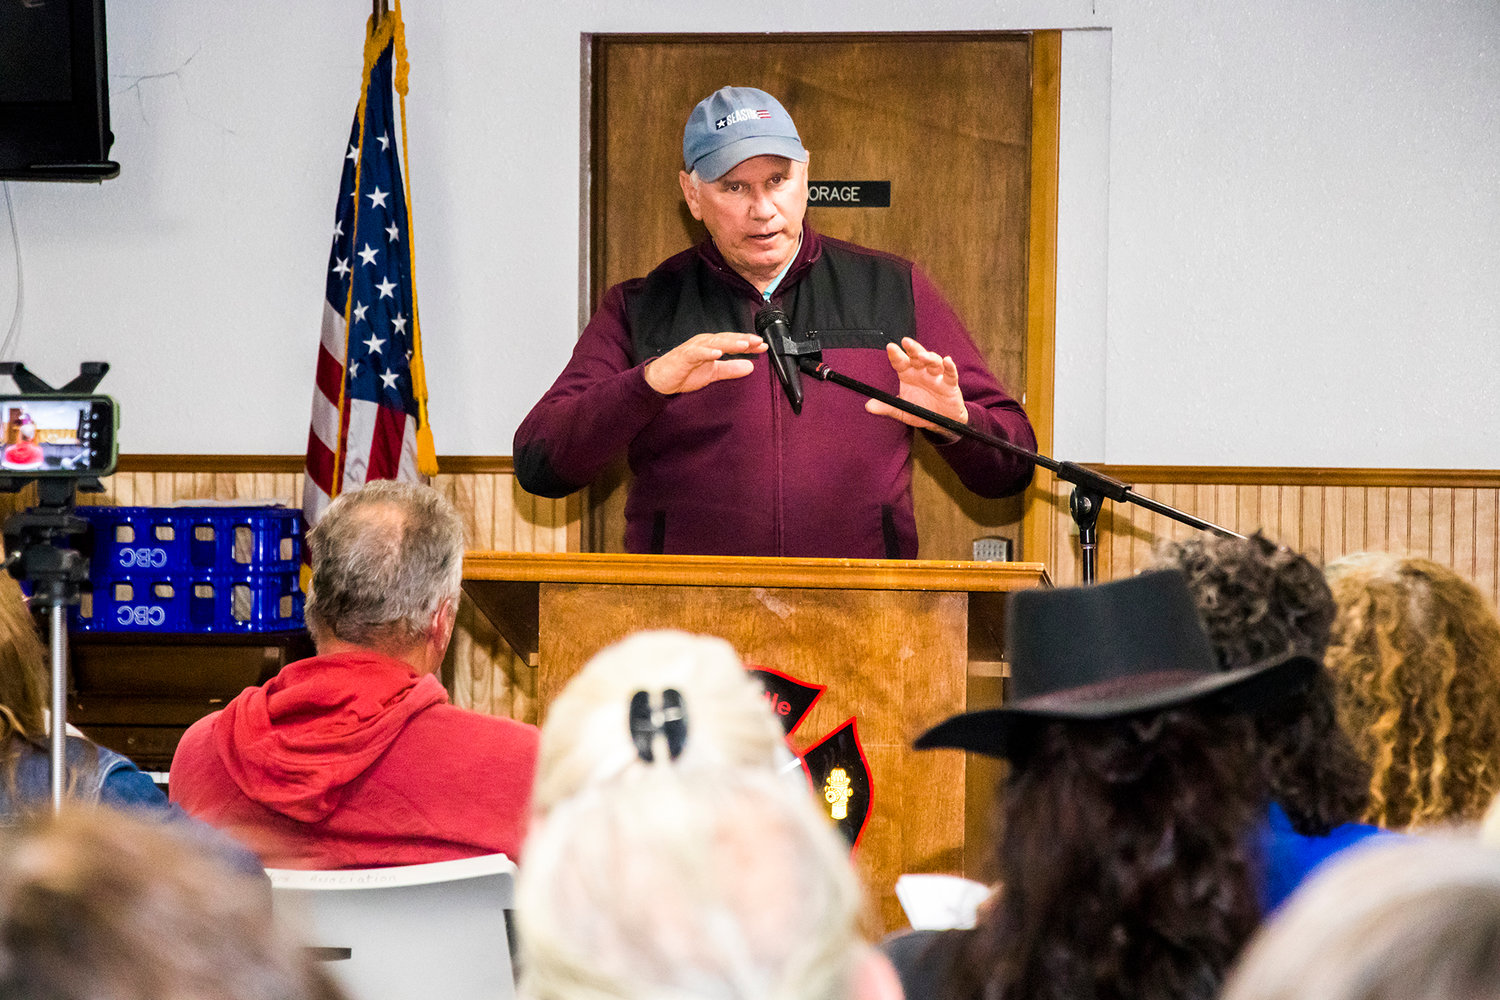 County commissioner Gary Stamper addresses a packed town hall in Randle about a proposed water bottling plant that has drawn strong opposition in the community.